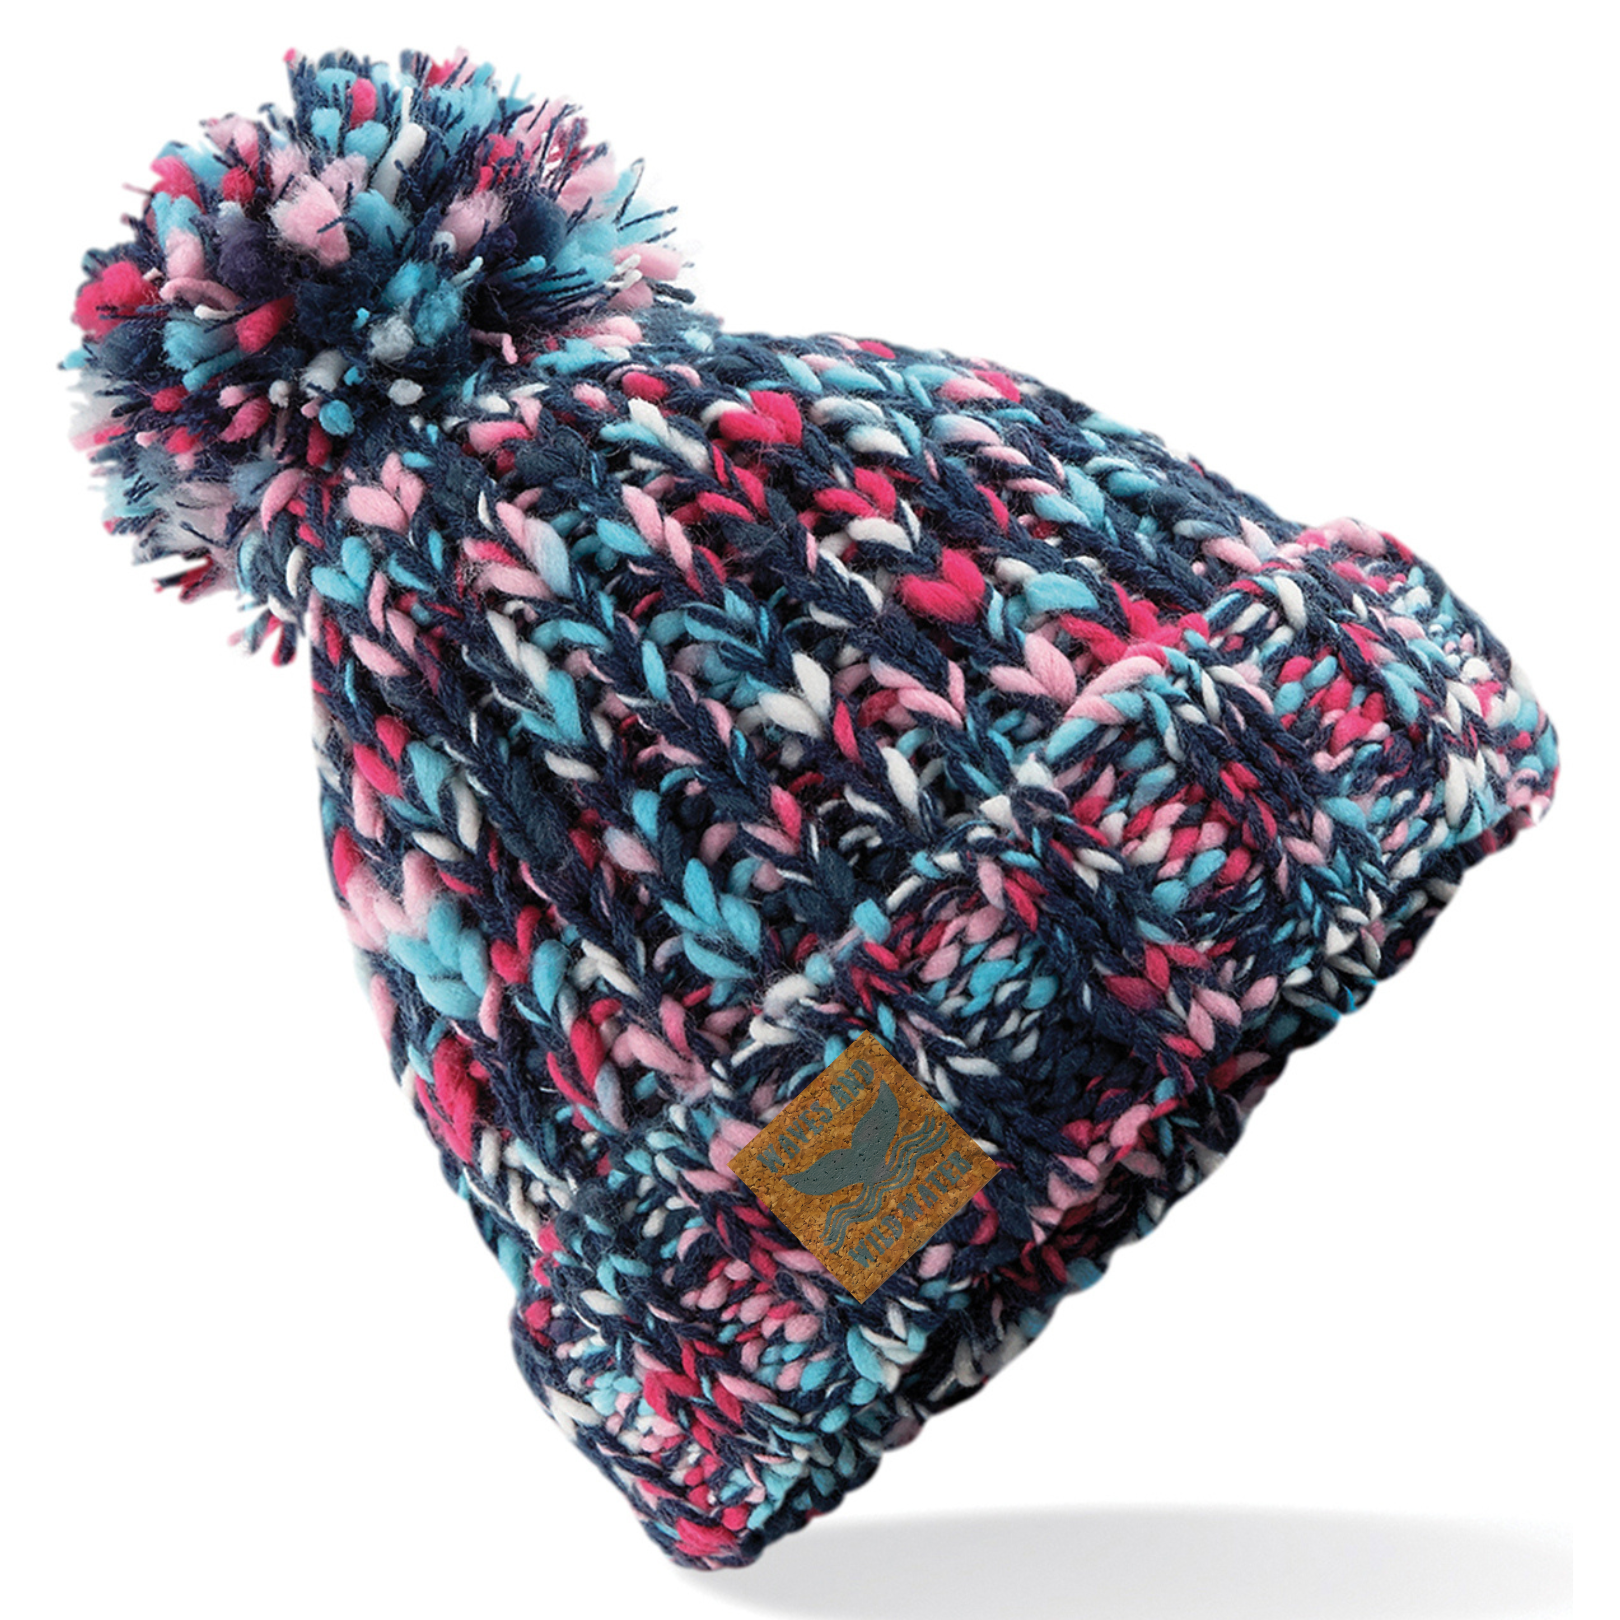 A blue and pink chunky knitted beanie hat with a pom pom.